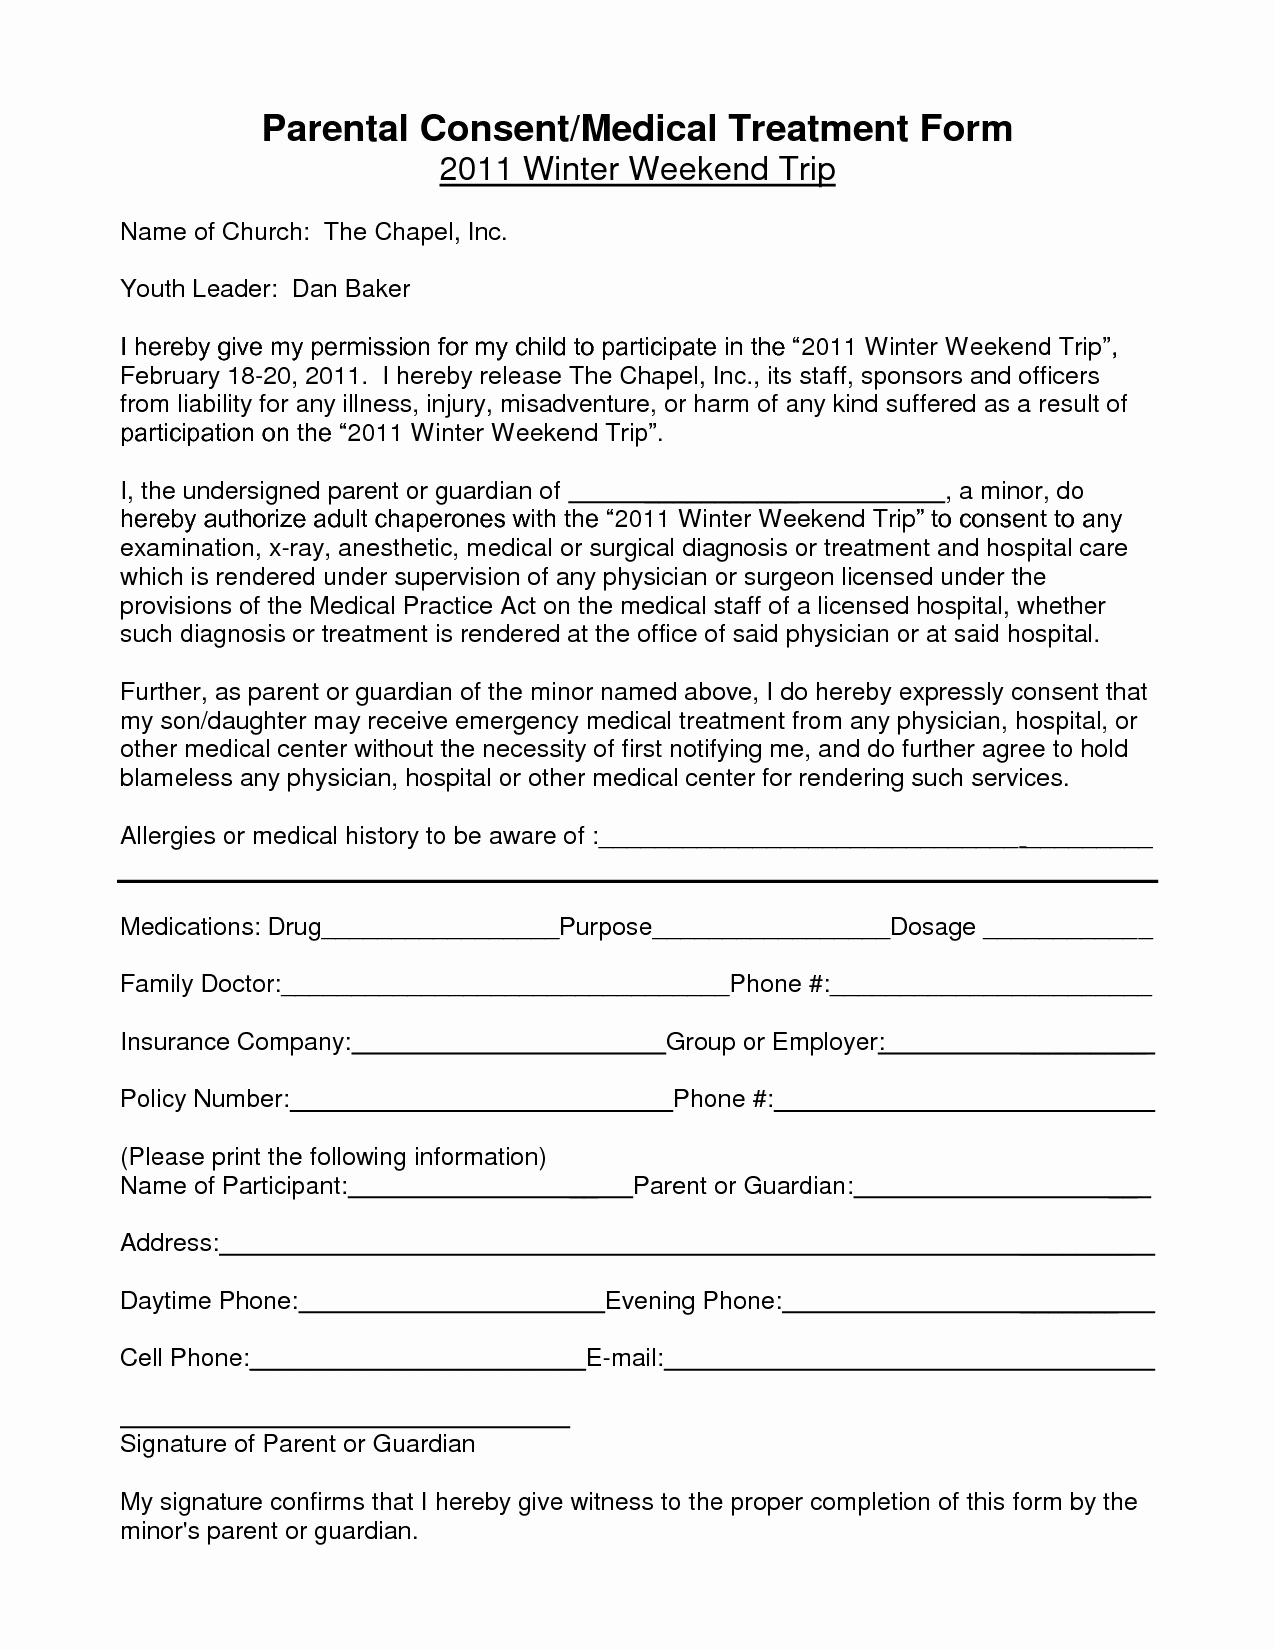 Medical Consent form Template Best Of Notarized Medical Consent form for Minor